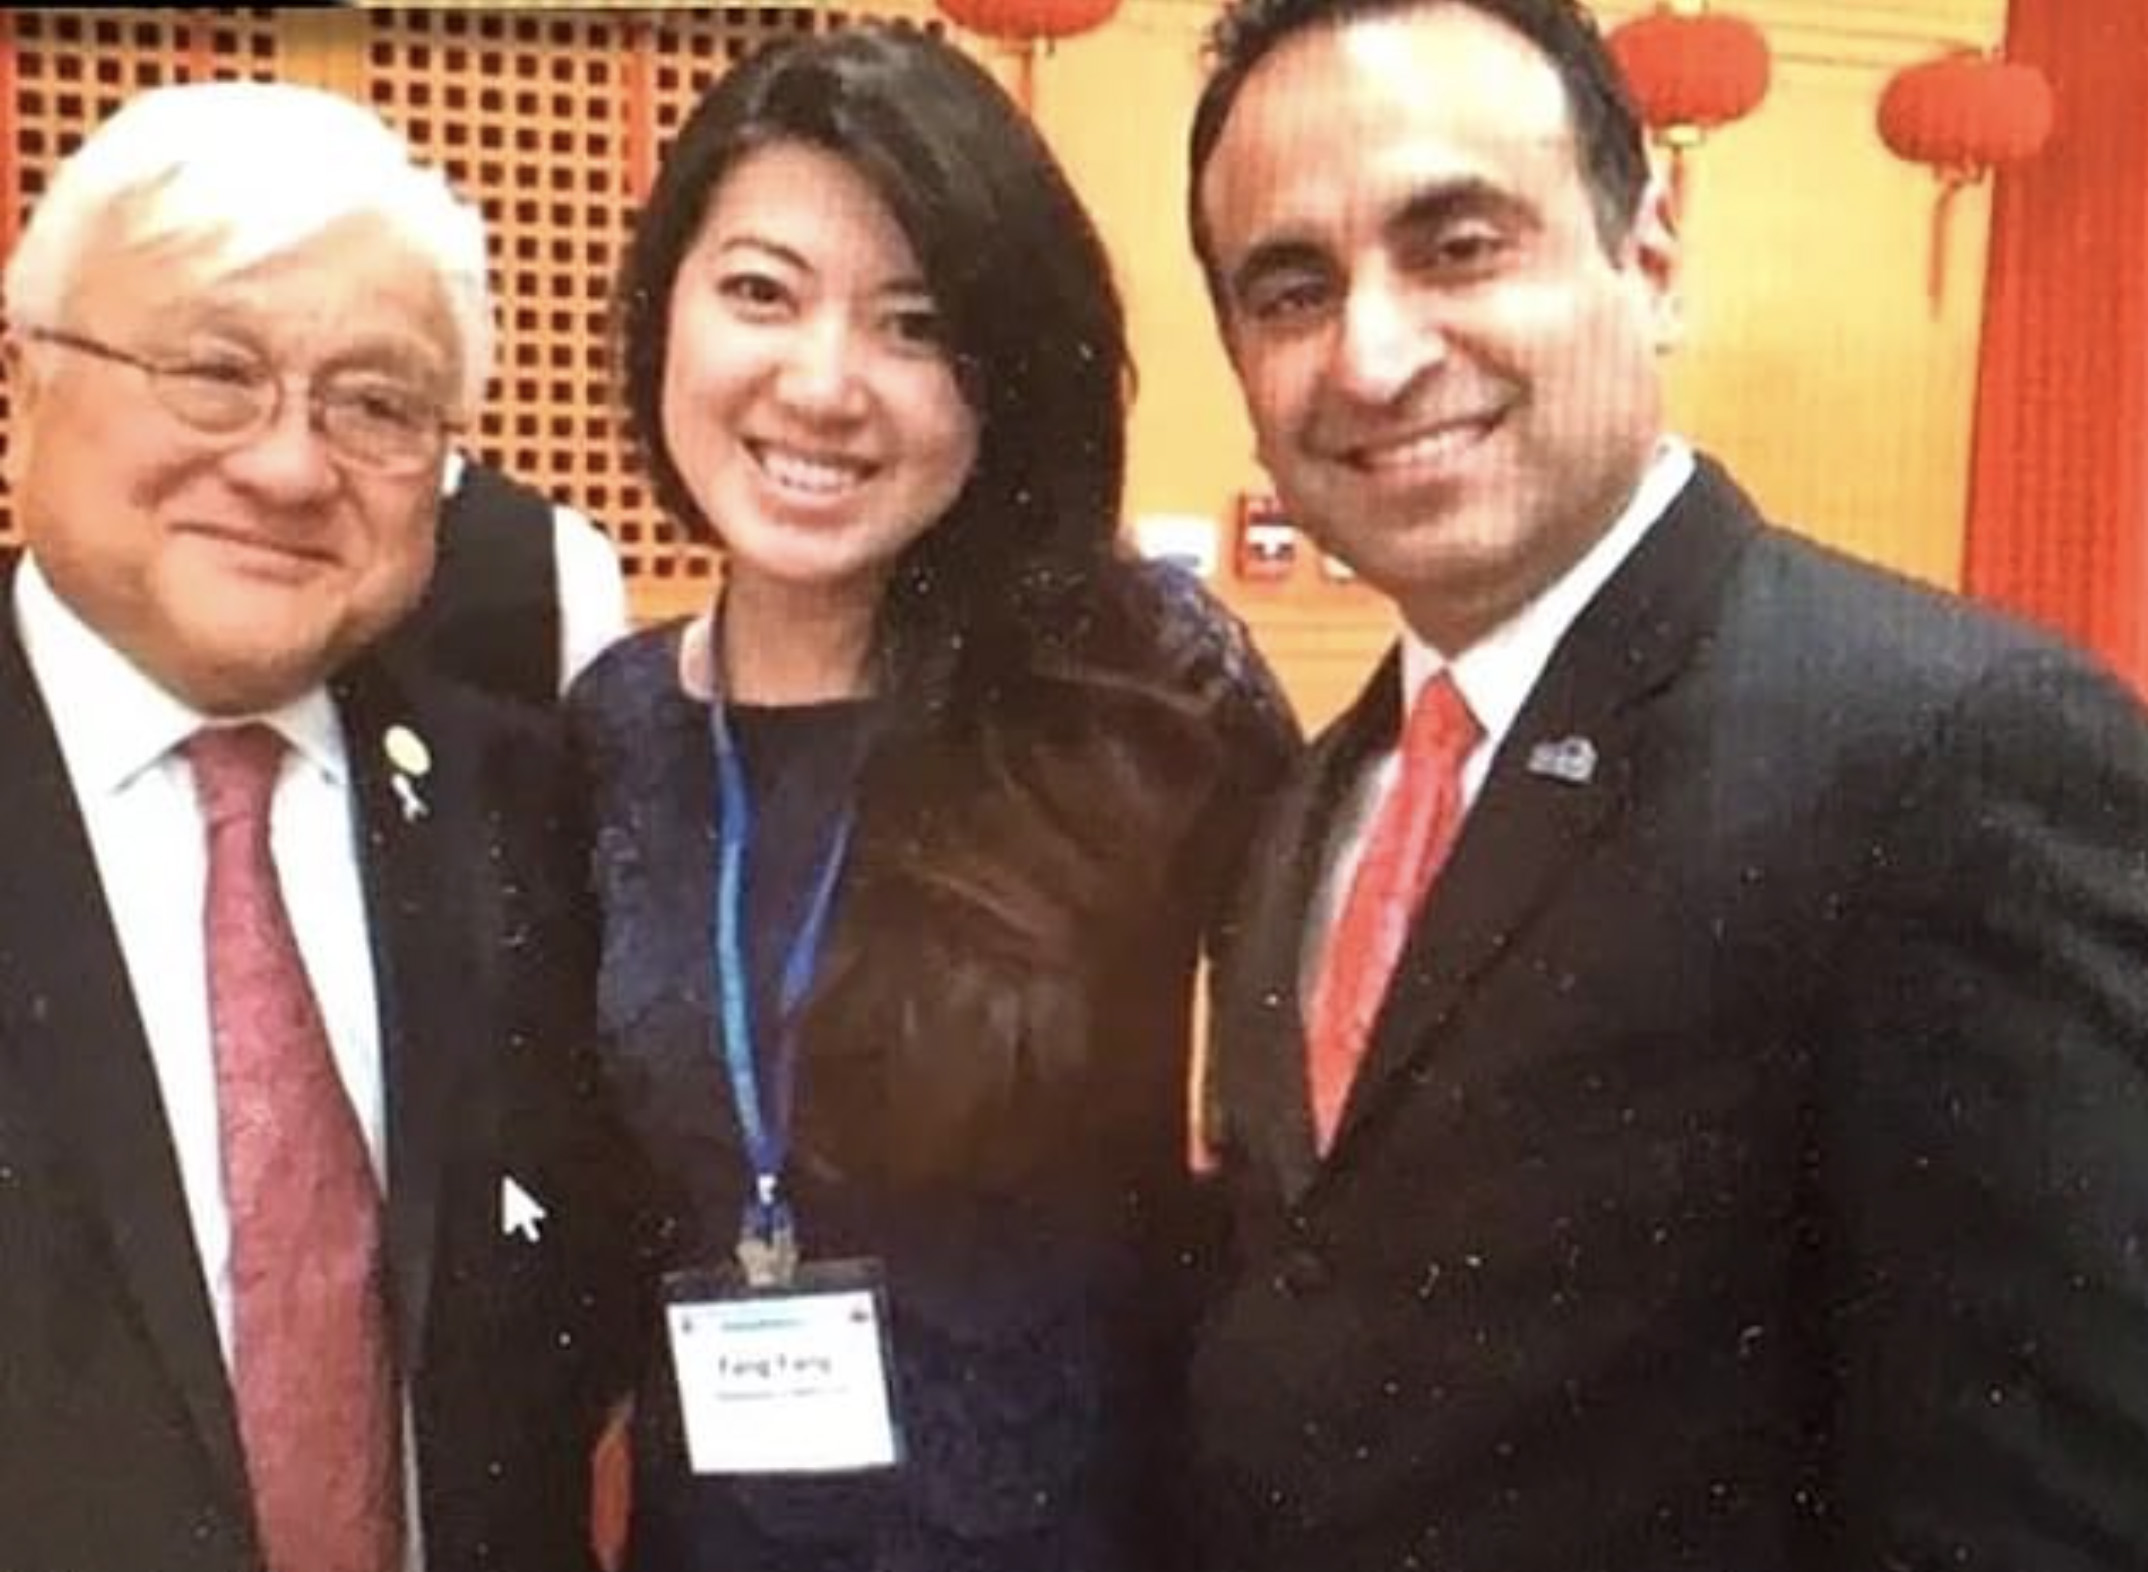 The suspected spy with then-Representative Mike Honda and then-San Jose city Councilmember Ash Kalra in March 2014 (left) with suspected Chinese intelligence operative Christine Fang (Honda and Kalra have not been of having a sexual relationship with Fang, nor any wrongdoing)